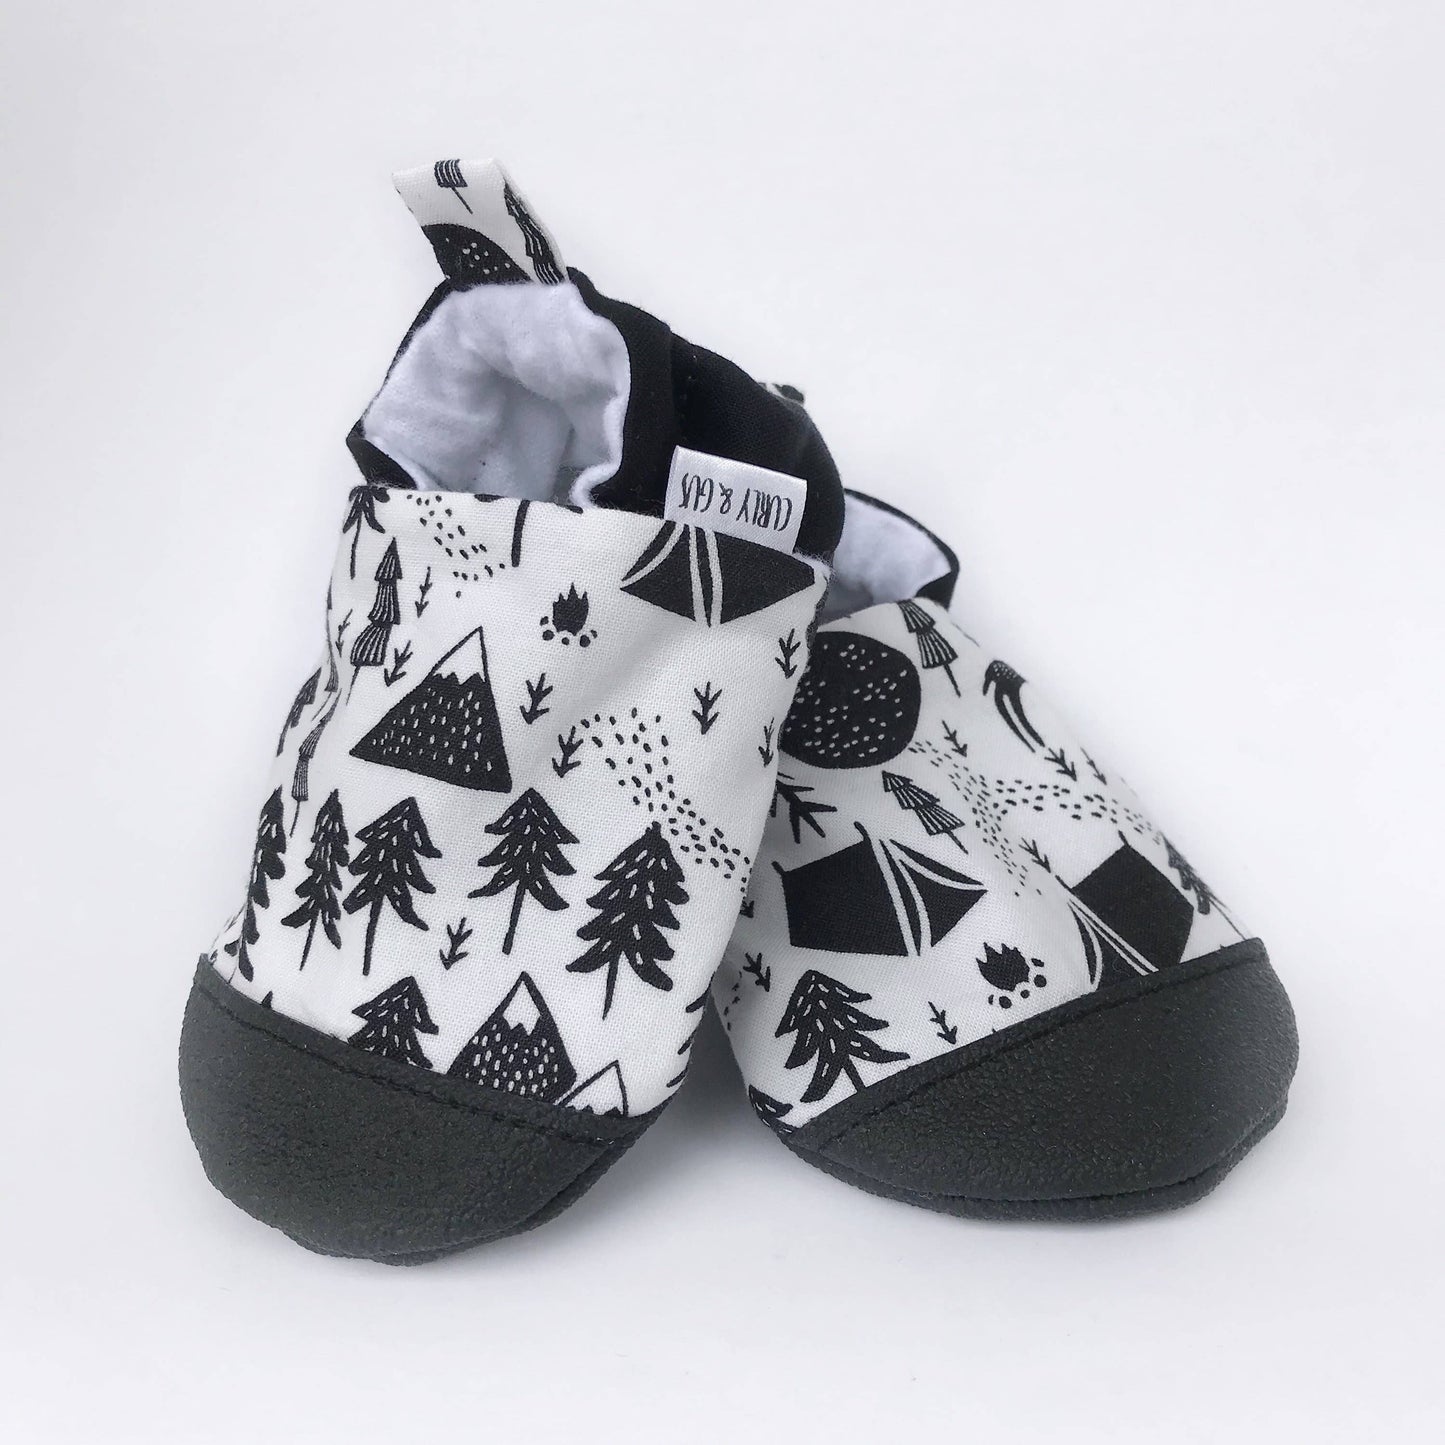 Woodland Baby Shoes: Gray Faux Suede / 18-24 months